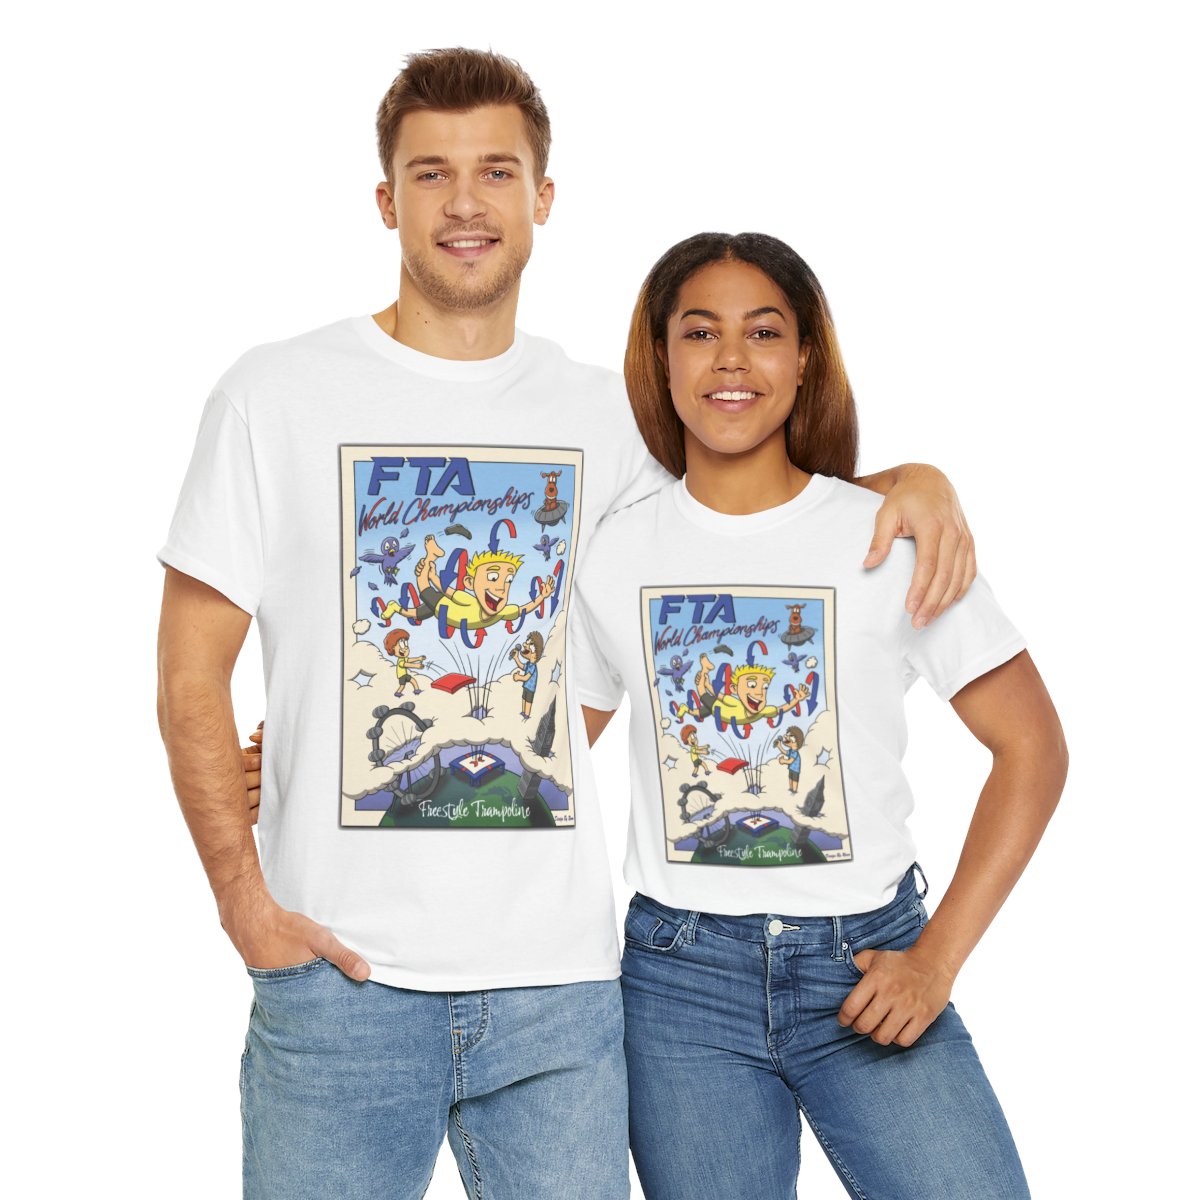 World Champs Cartoon Tee by Remo product thumbnail image